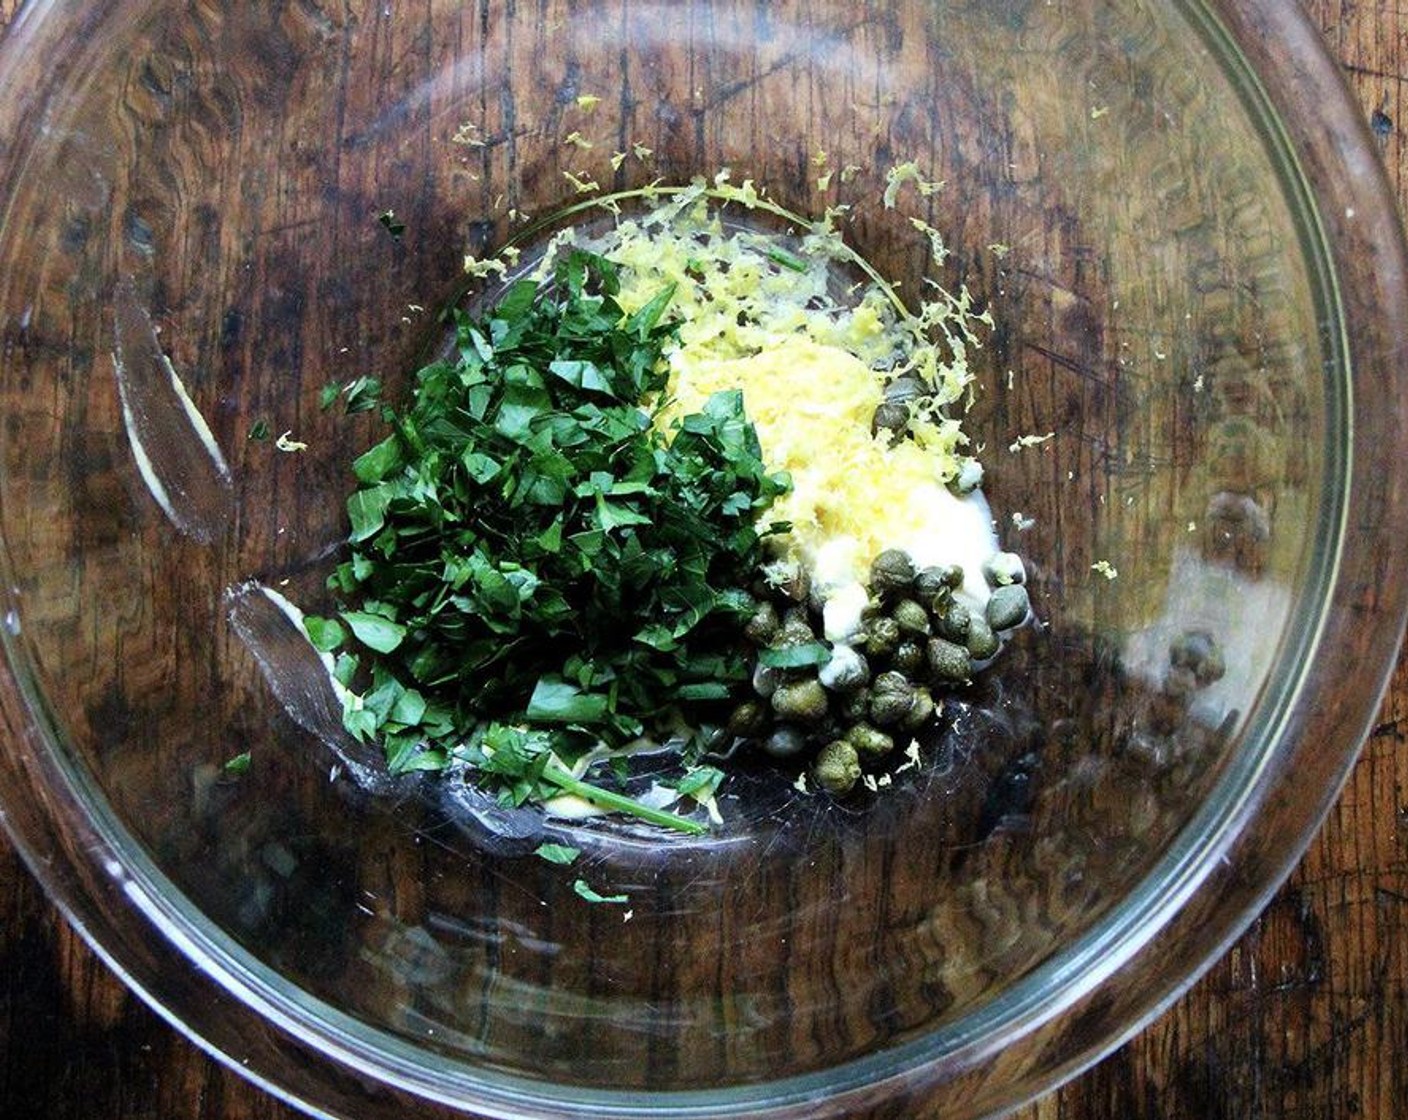 step 2 In a small bowl, stir together the Mayonnaise (2 Tbsp), Dijon Mustard (1 Tbsp), Capers (1 Tbsp), Fresh Parsley (2 Tbsp), and zest of the Lemon (1).